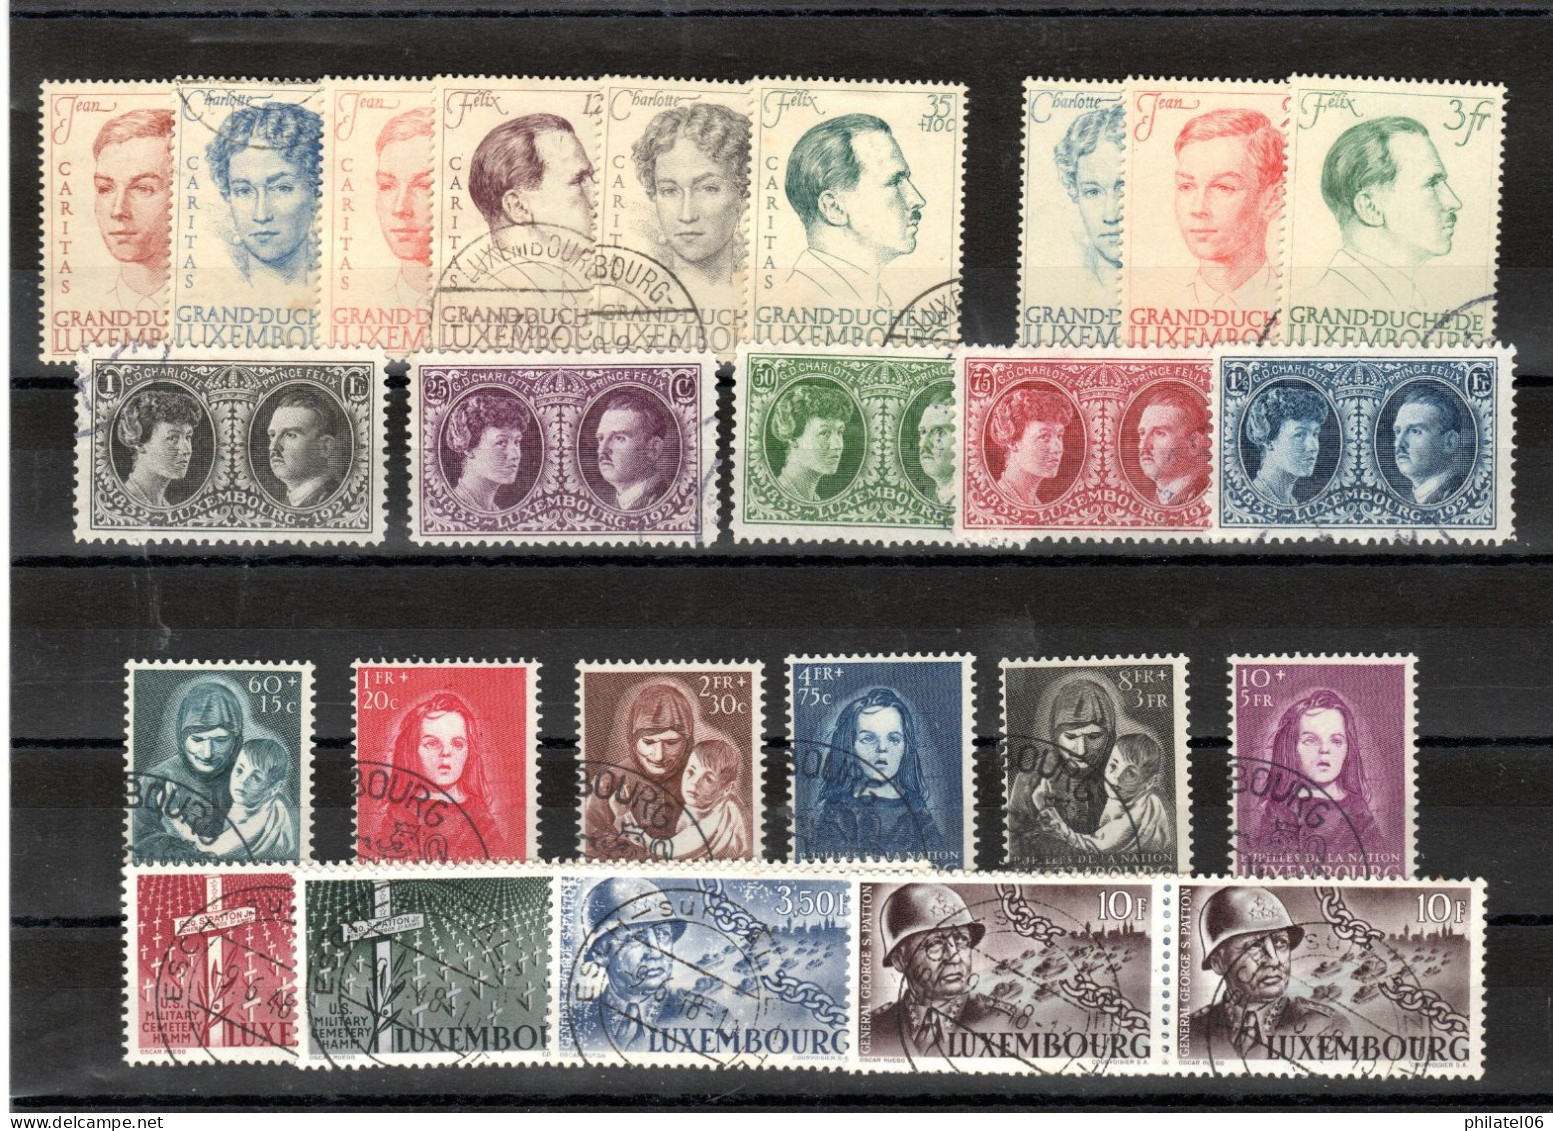 LUXEMBOURG  BEL ENSEMBLE DE SERIES OBLITEREES  COTE: 350 EUROS - Used Stamps